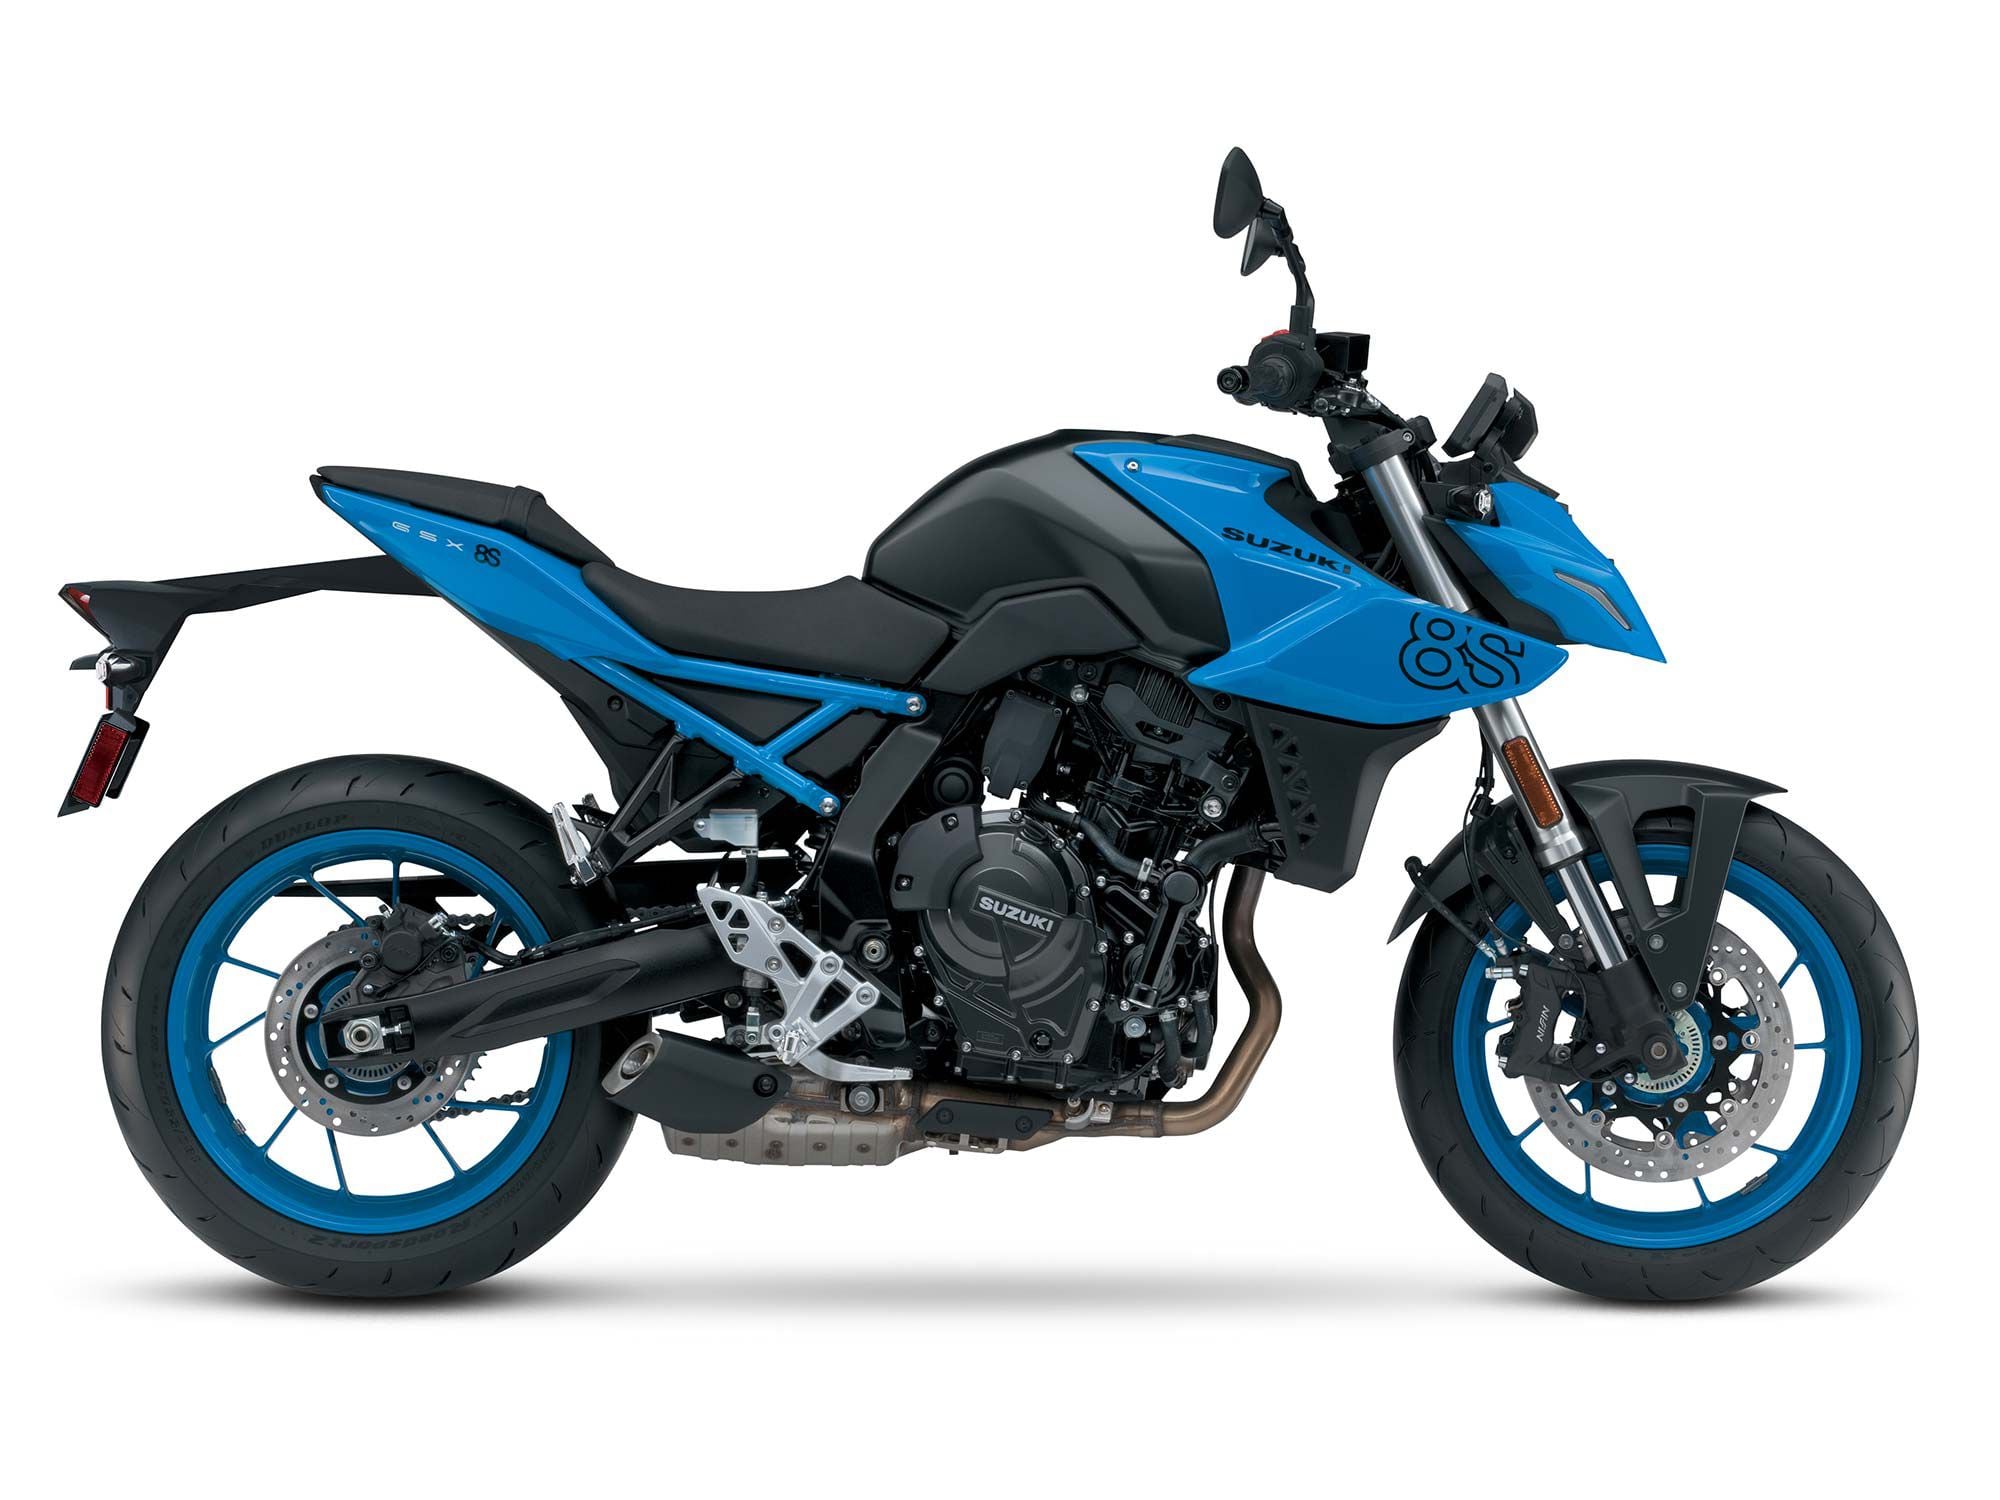 The GSX-8S is a stylish and modern entry into the midsize naked-bike category.